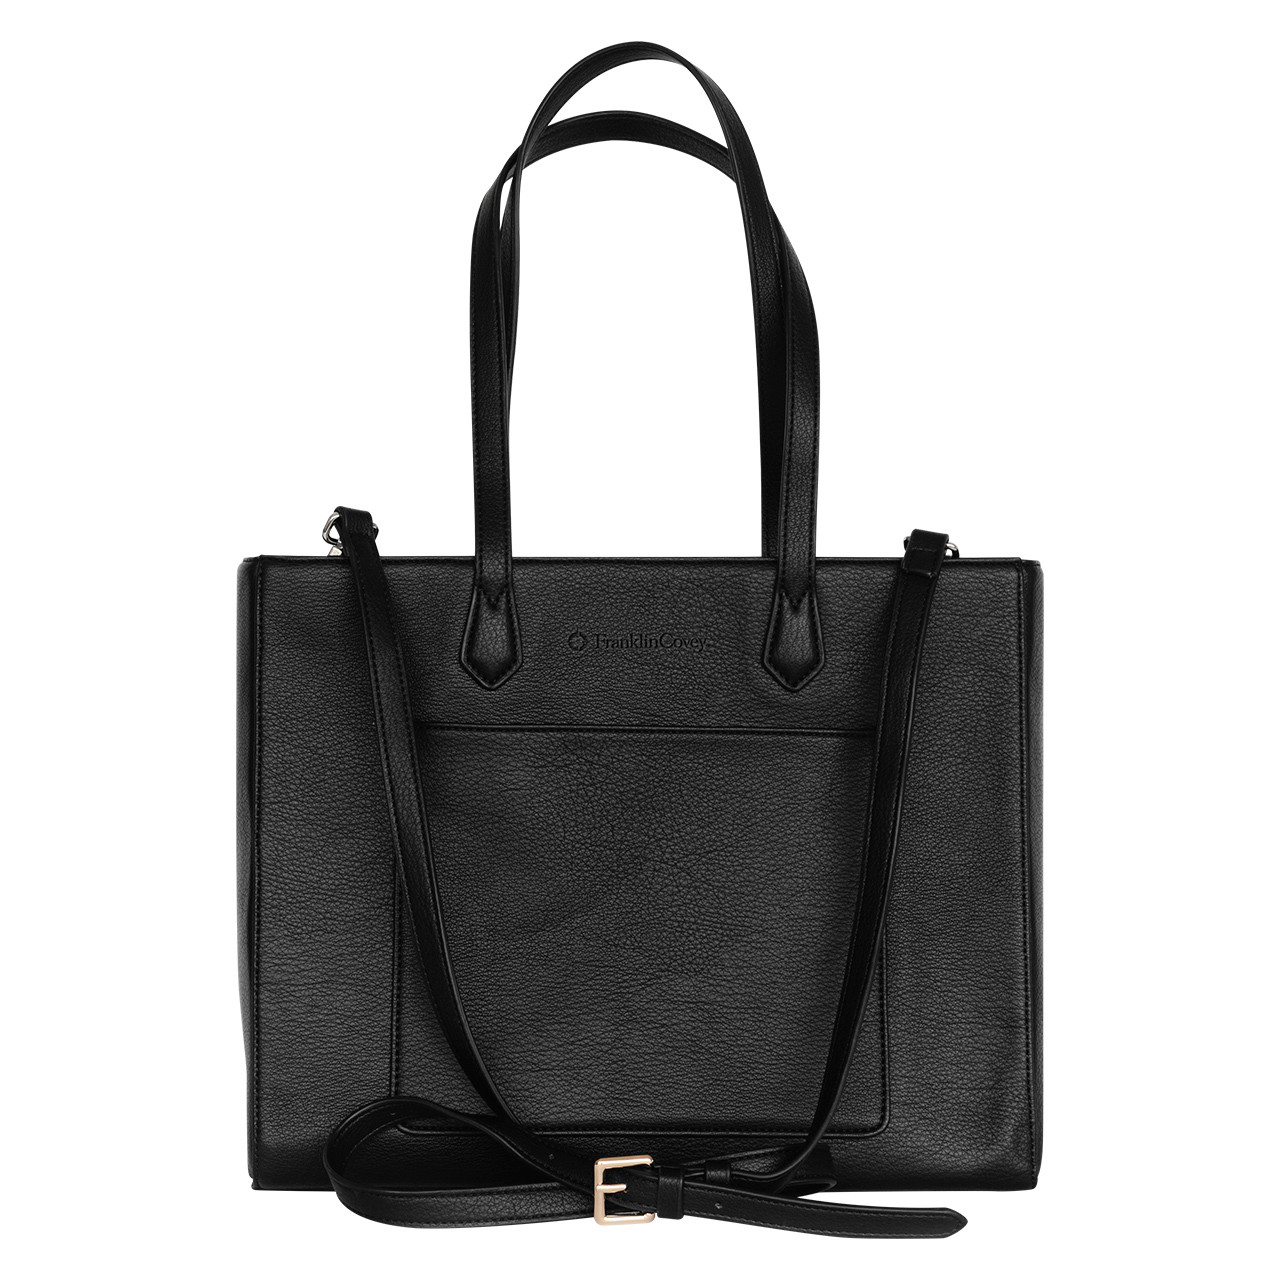 Franklin Covey Black Leather Hand Bag Travel Laptop Tote Purse